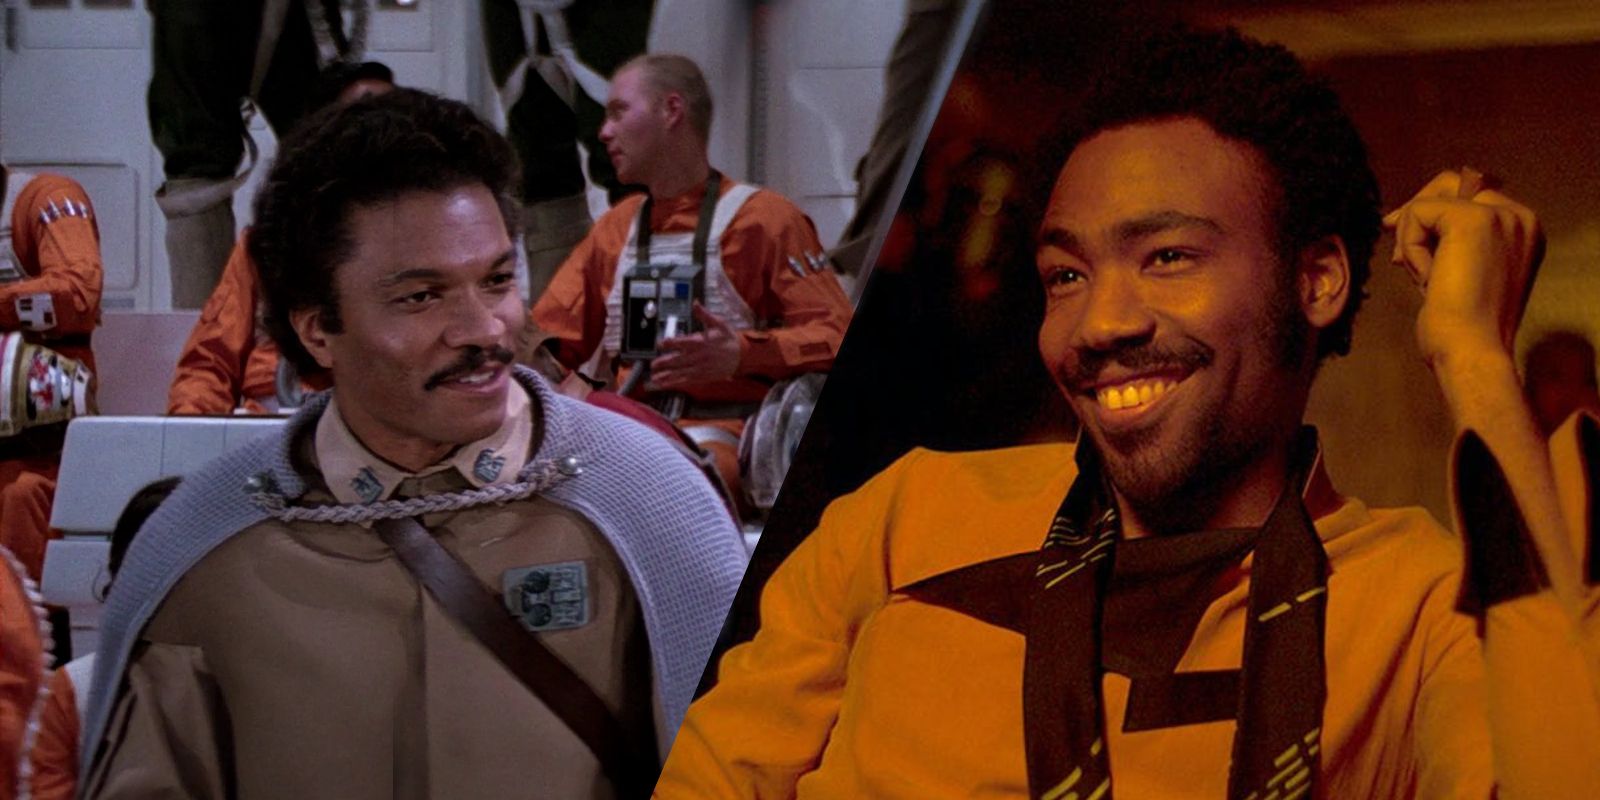 Lando Calrissian as played by both Billy Dee Williams and Donald Glover